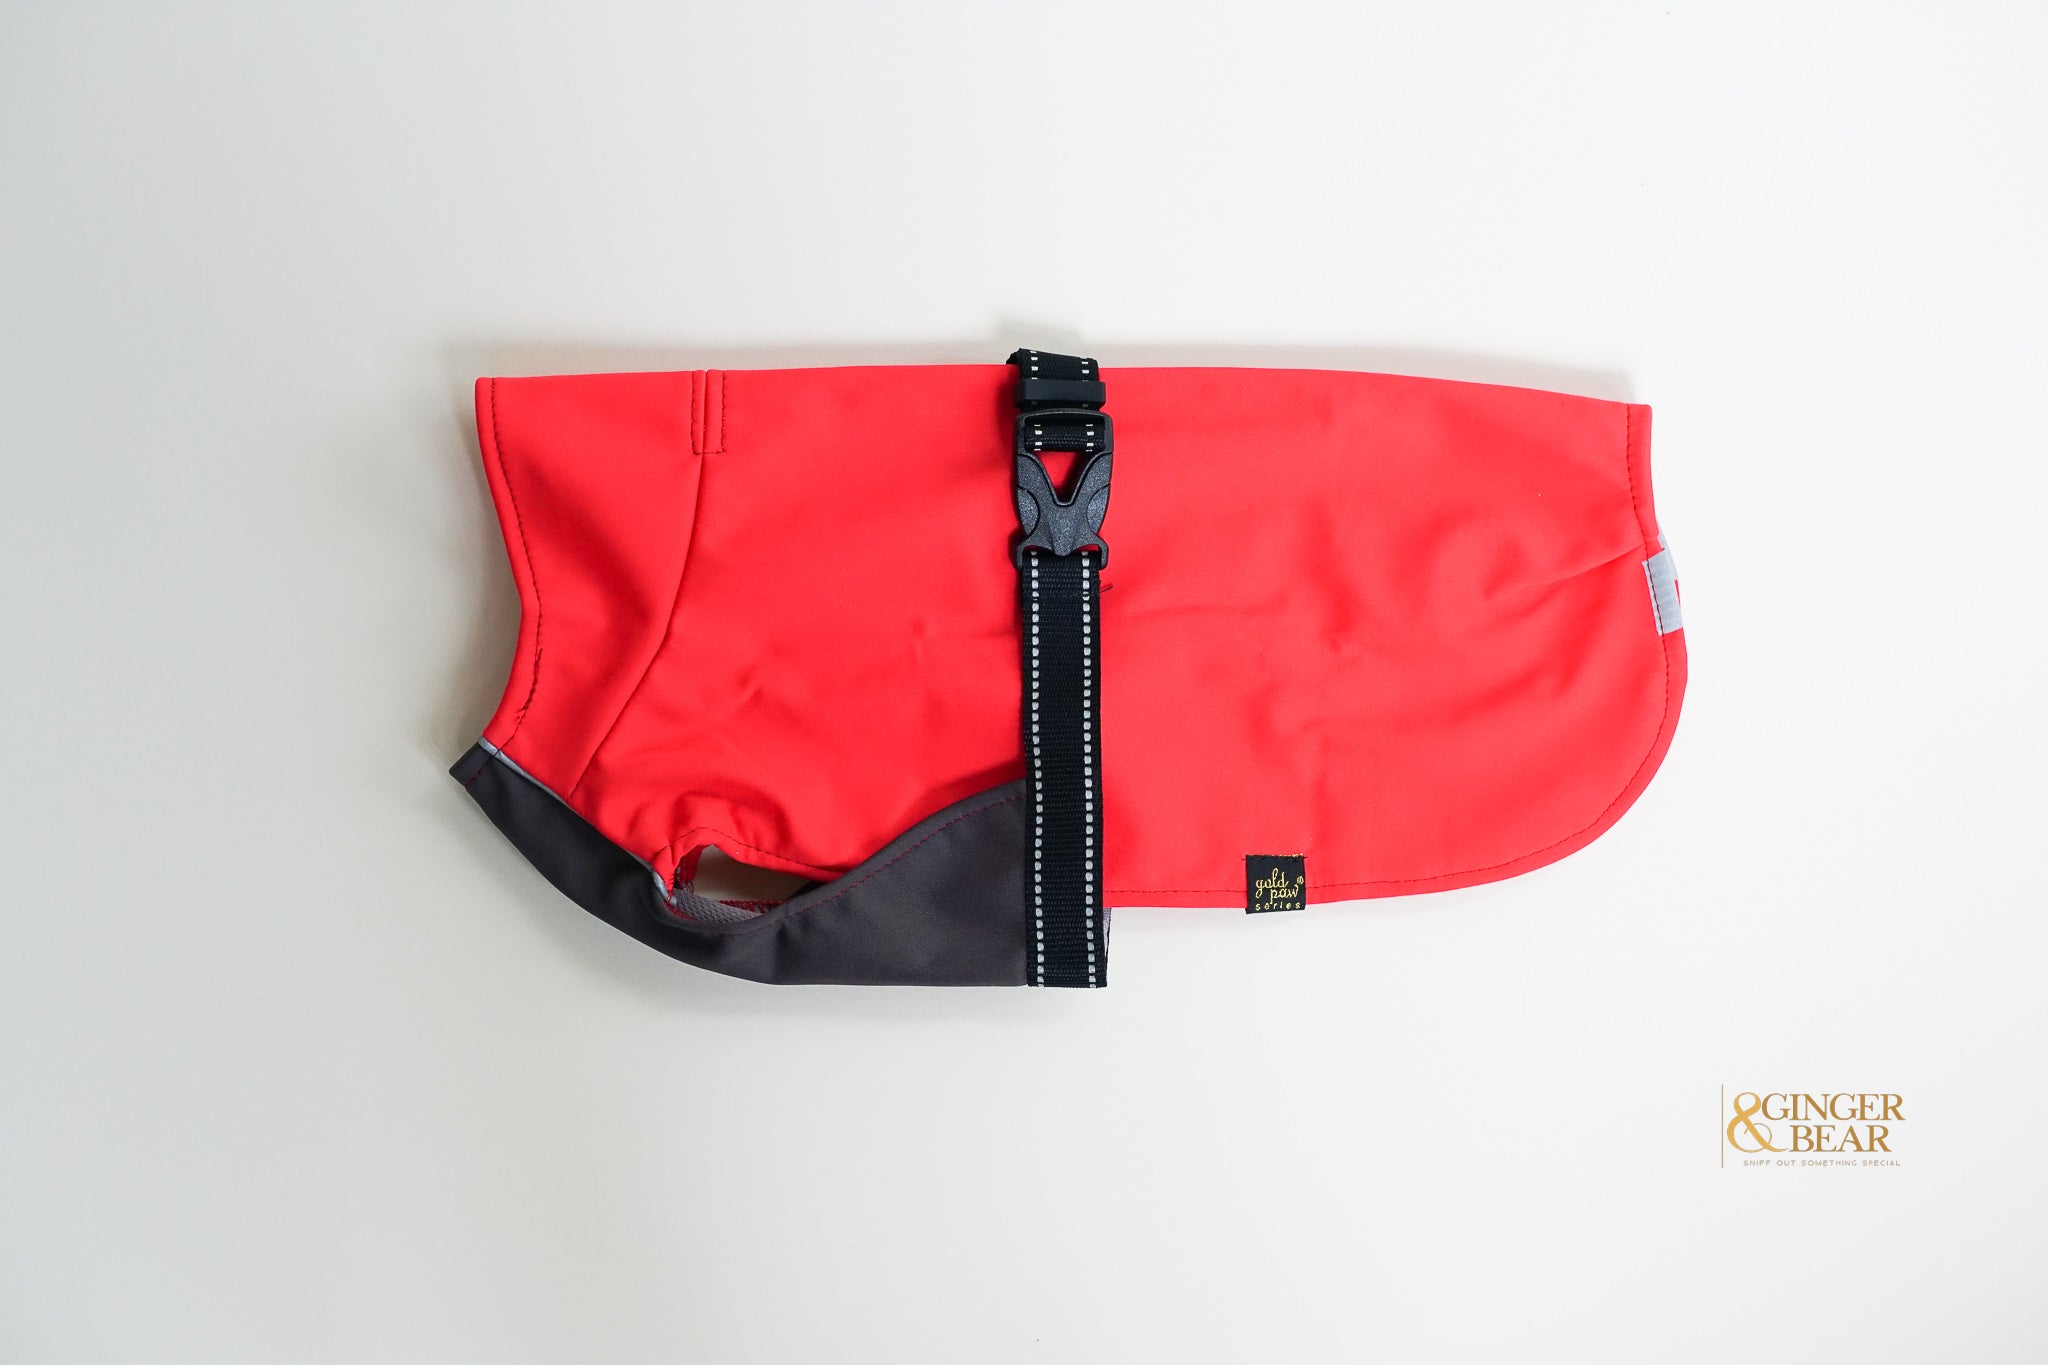 The Rain Paw, raincoat for Dogs, in Red and Graphite